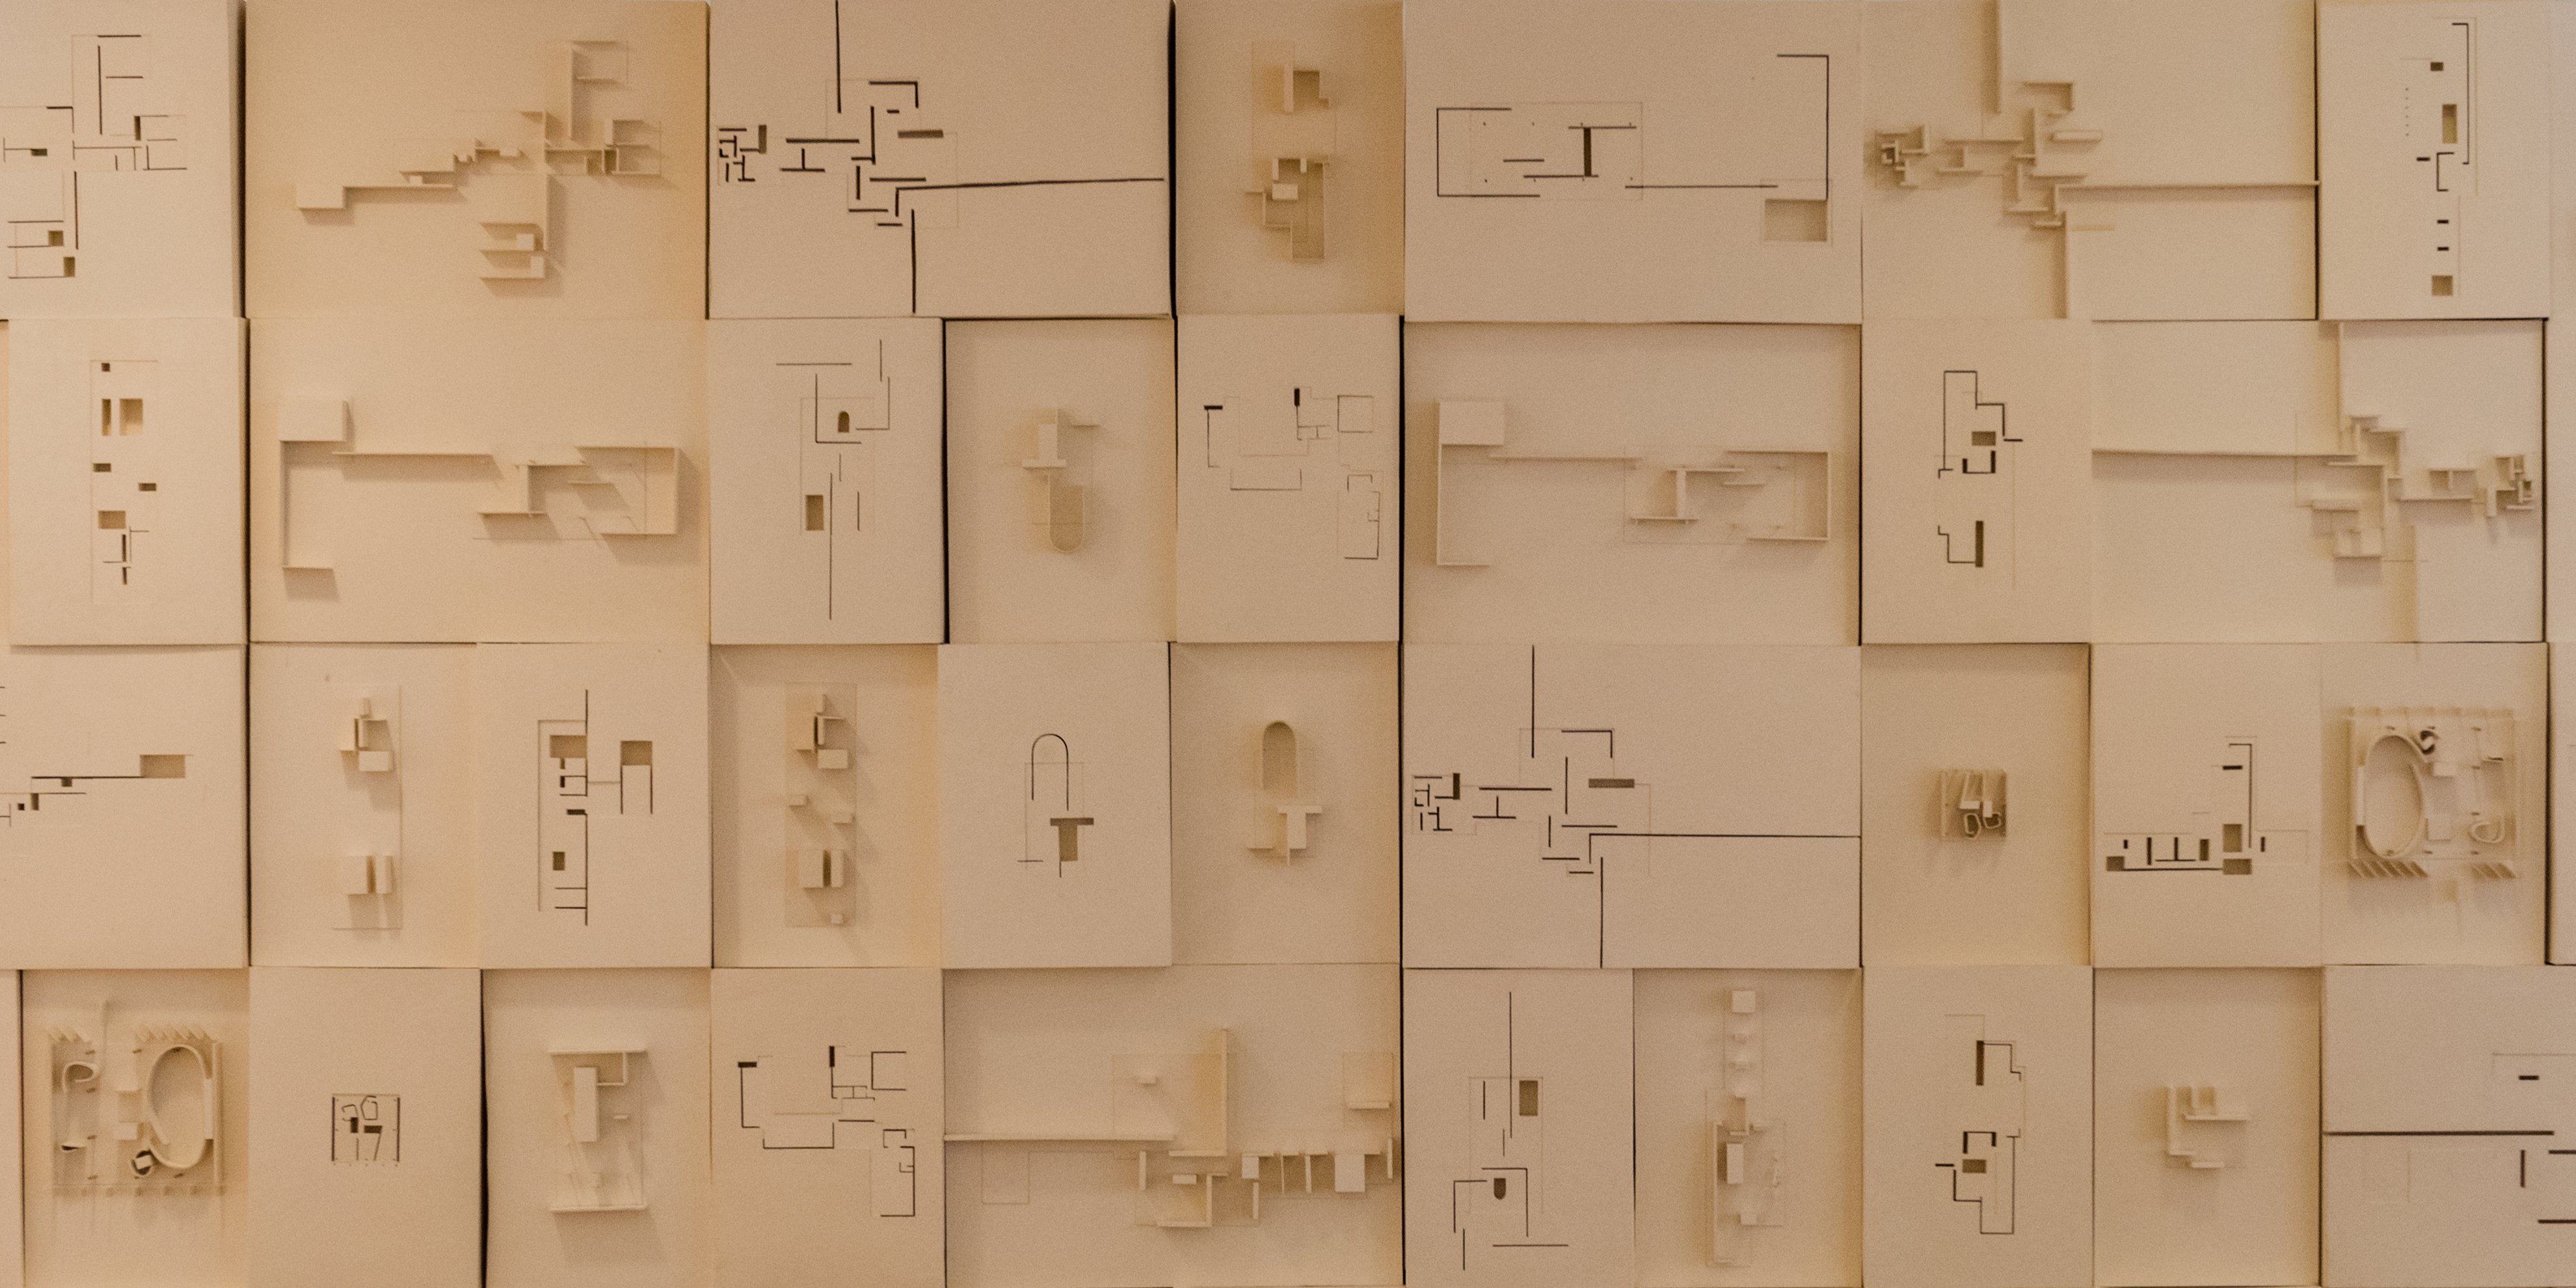 Architecture models in top view